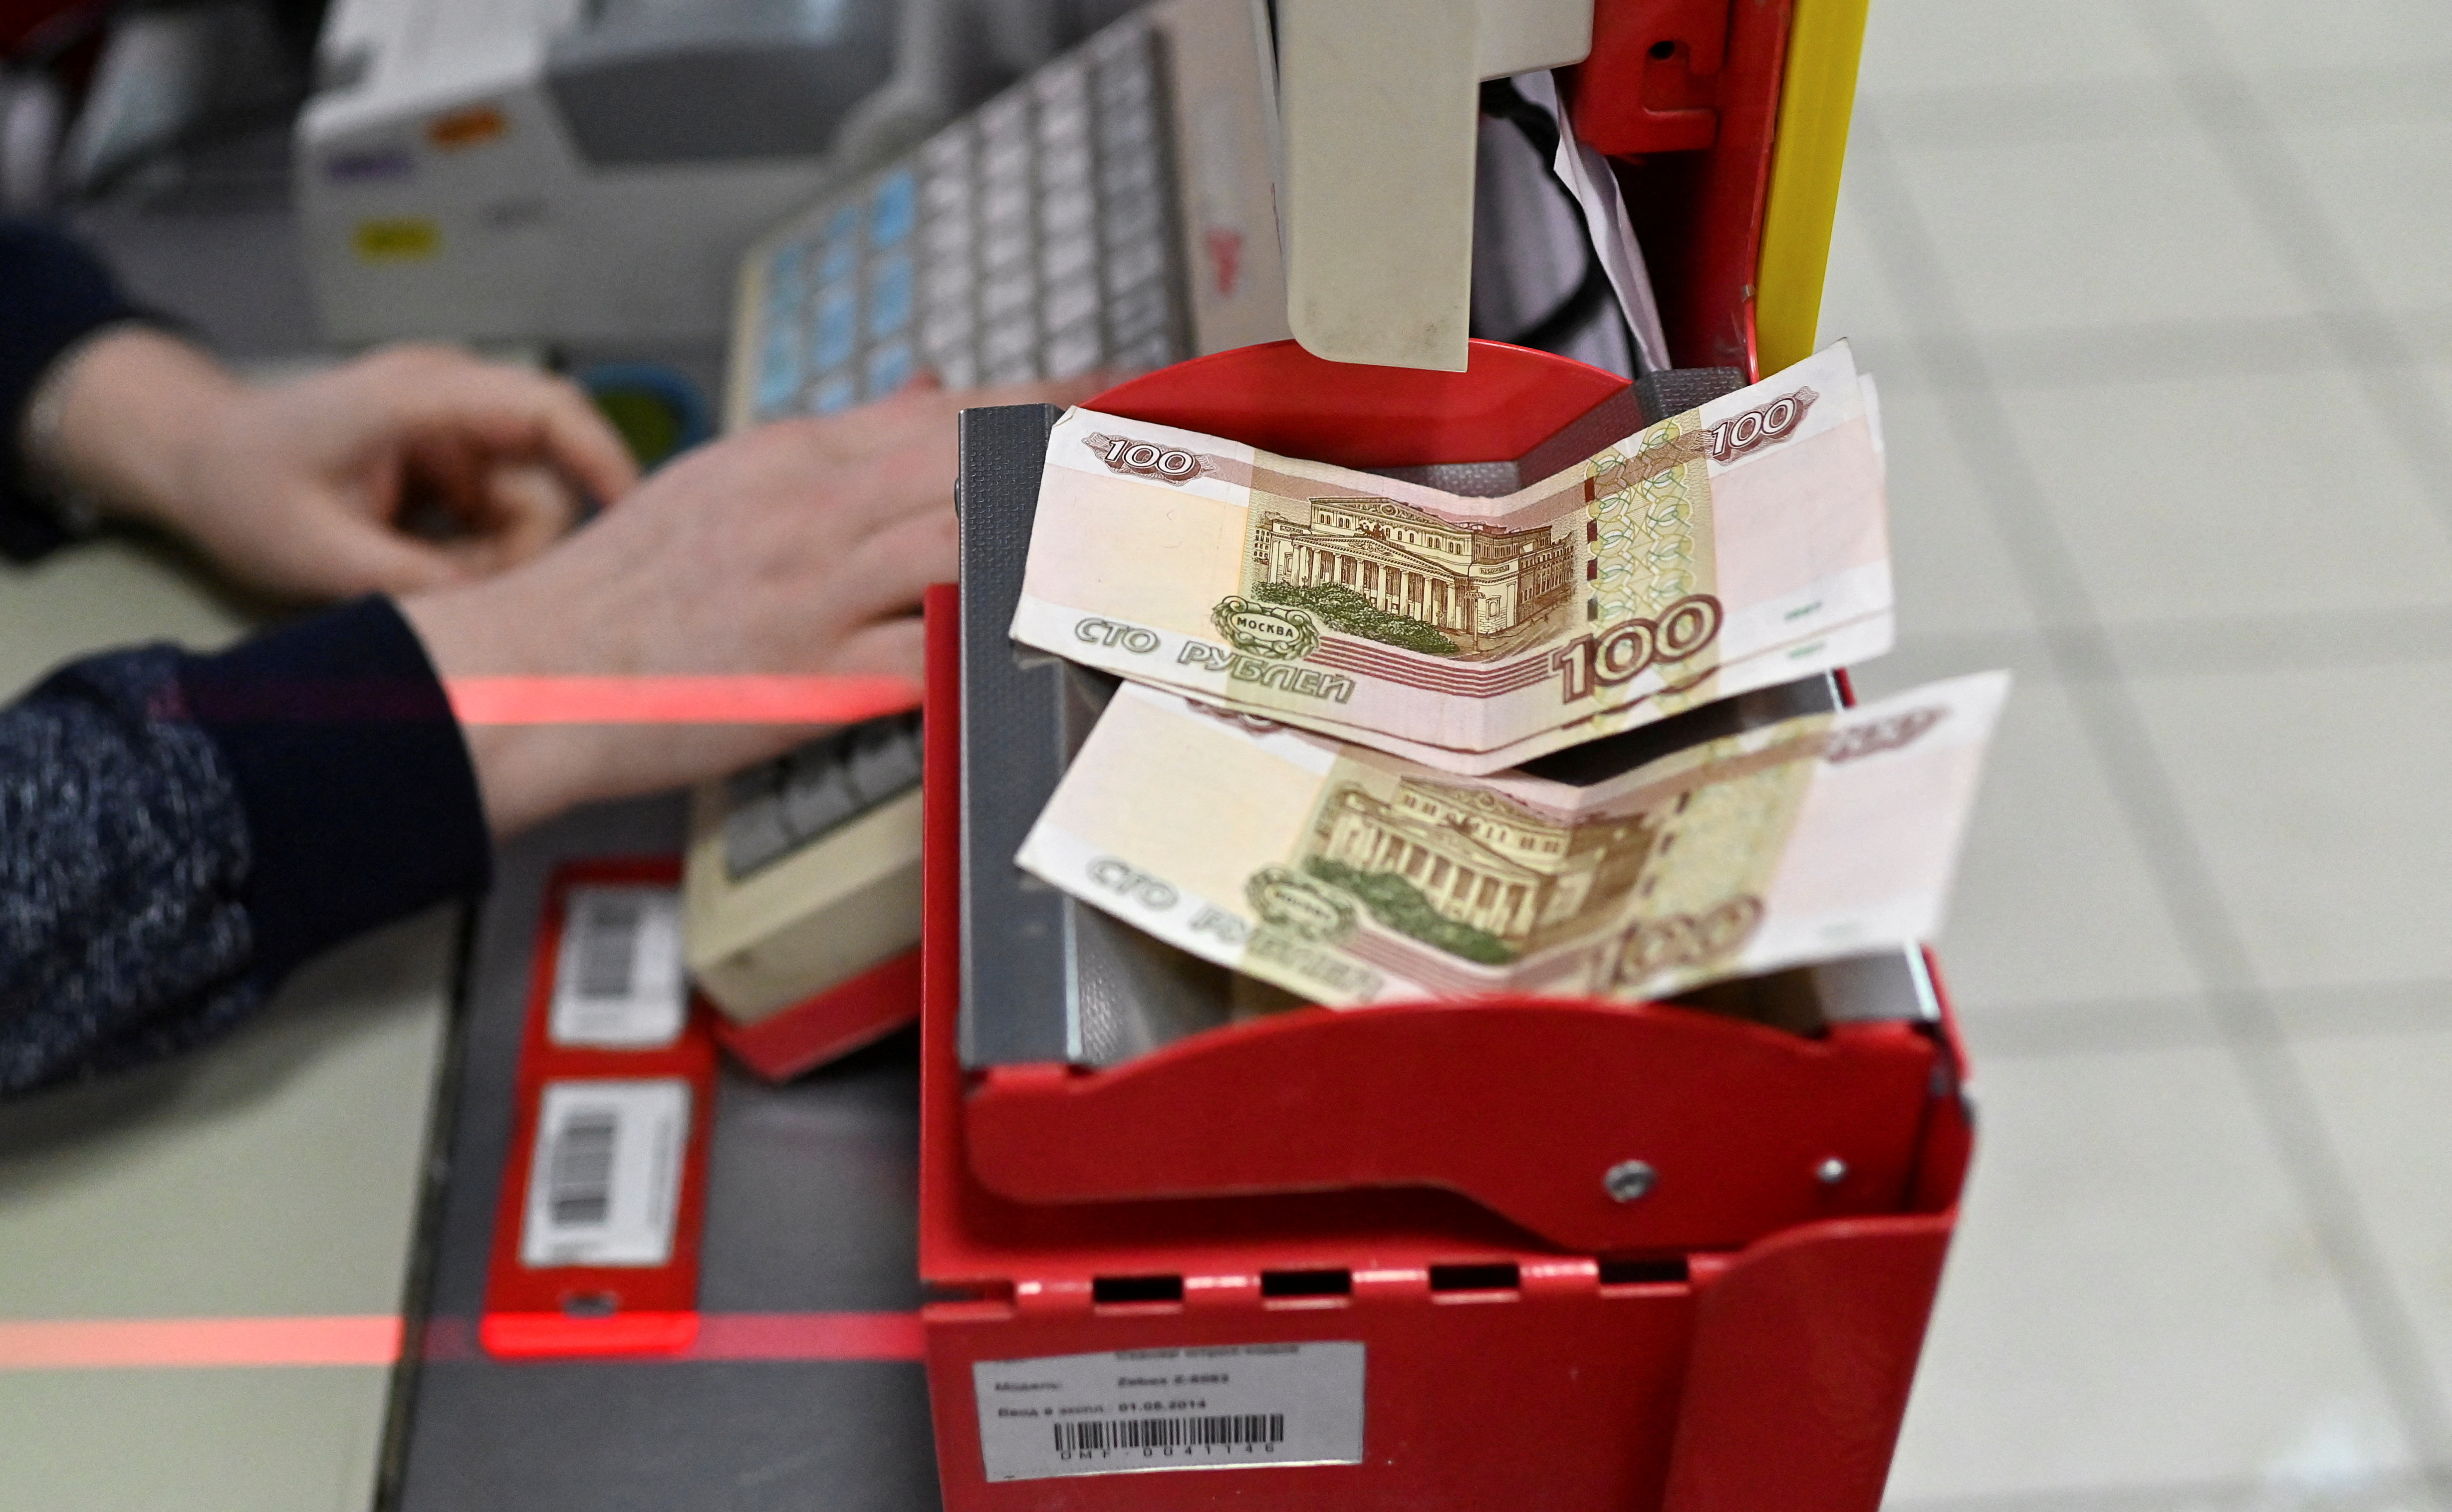 Russian 100-rouble banknotes are placed on a cashier's desk at a supermarket in Tara